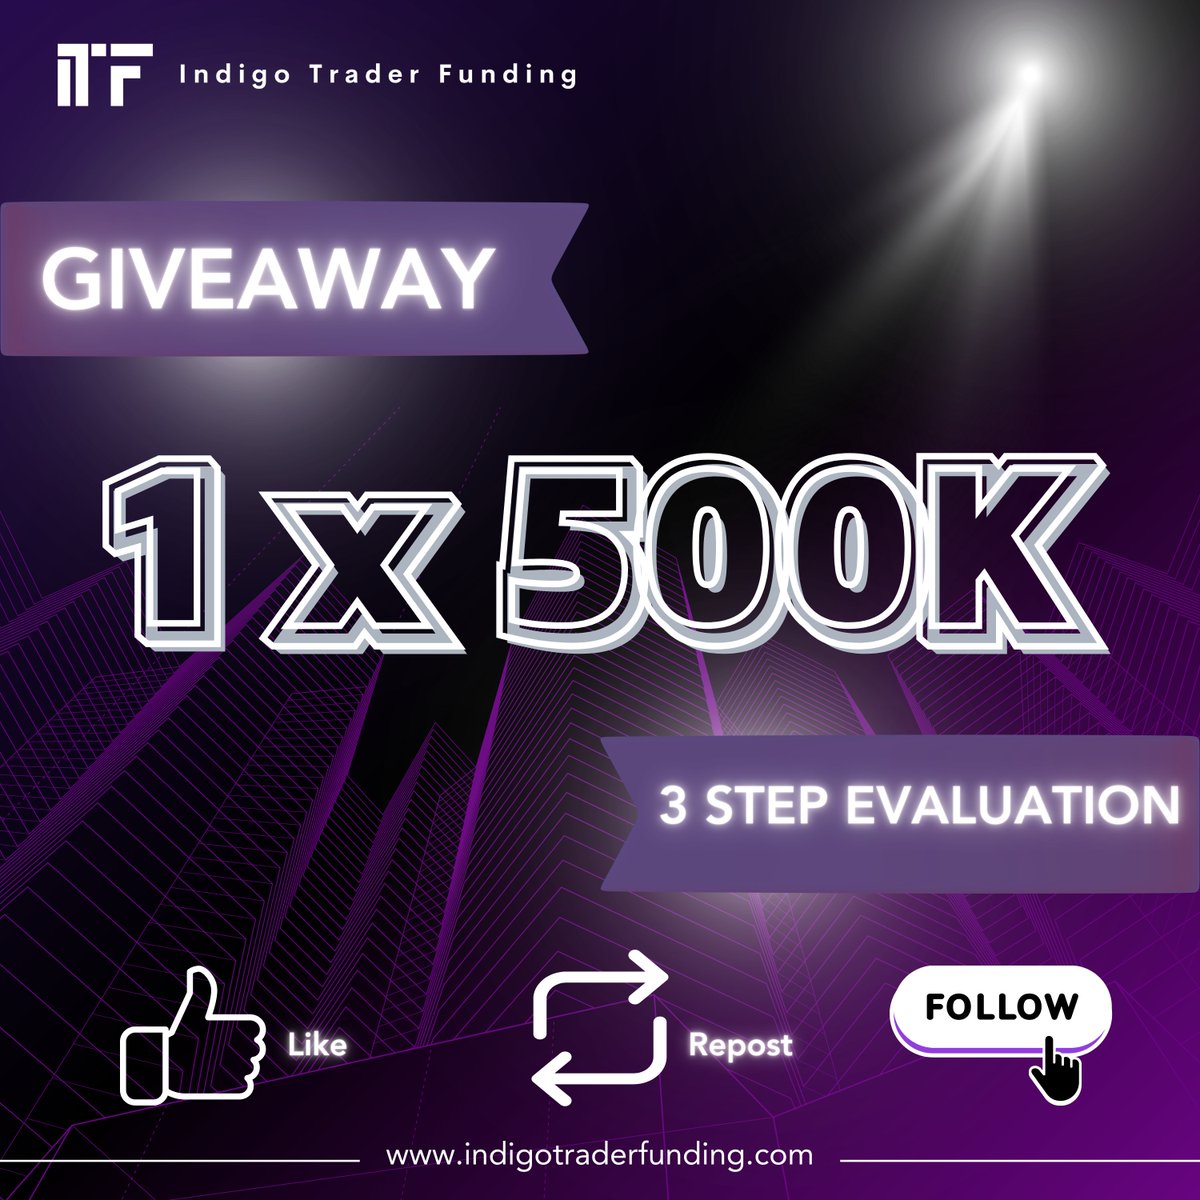 🟣 CHALLENGE ACCOUNT GIVEAWAY 🟣

Largest account size ever given away? 🤔

This is a fantastic opportunity for 1 lucky winner to get funded with 500K🤯

RULES
1. Follow @IndigoFundingUK & @LucasIndigoCEO 
2. Join our discord discord.gg/3aUBjESdqE
3. Like and Repost

Winner